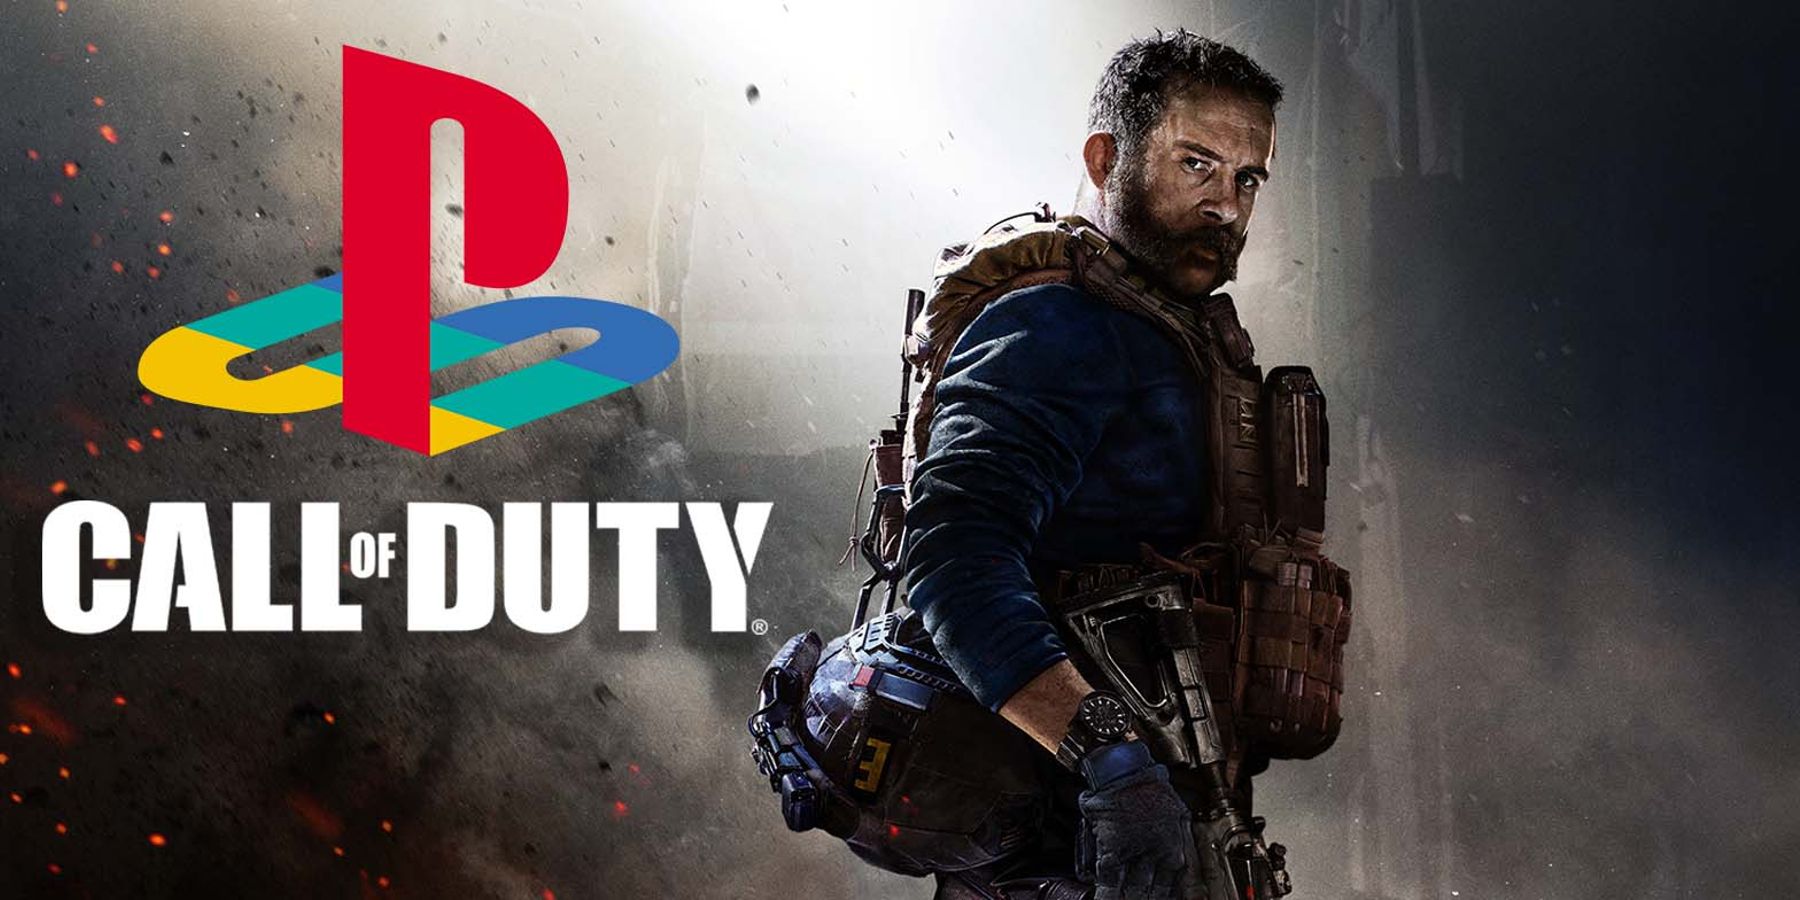 Call of Duty's PlayStation exclusive content looking pretty thin this year